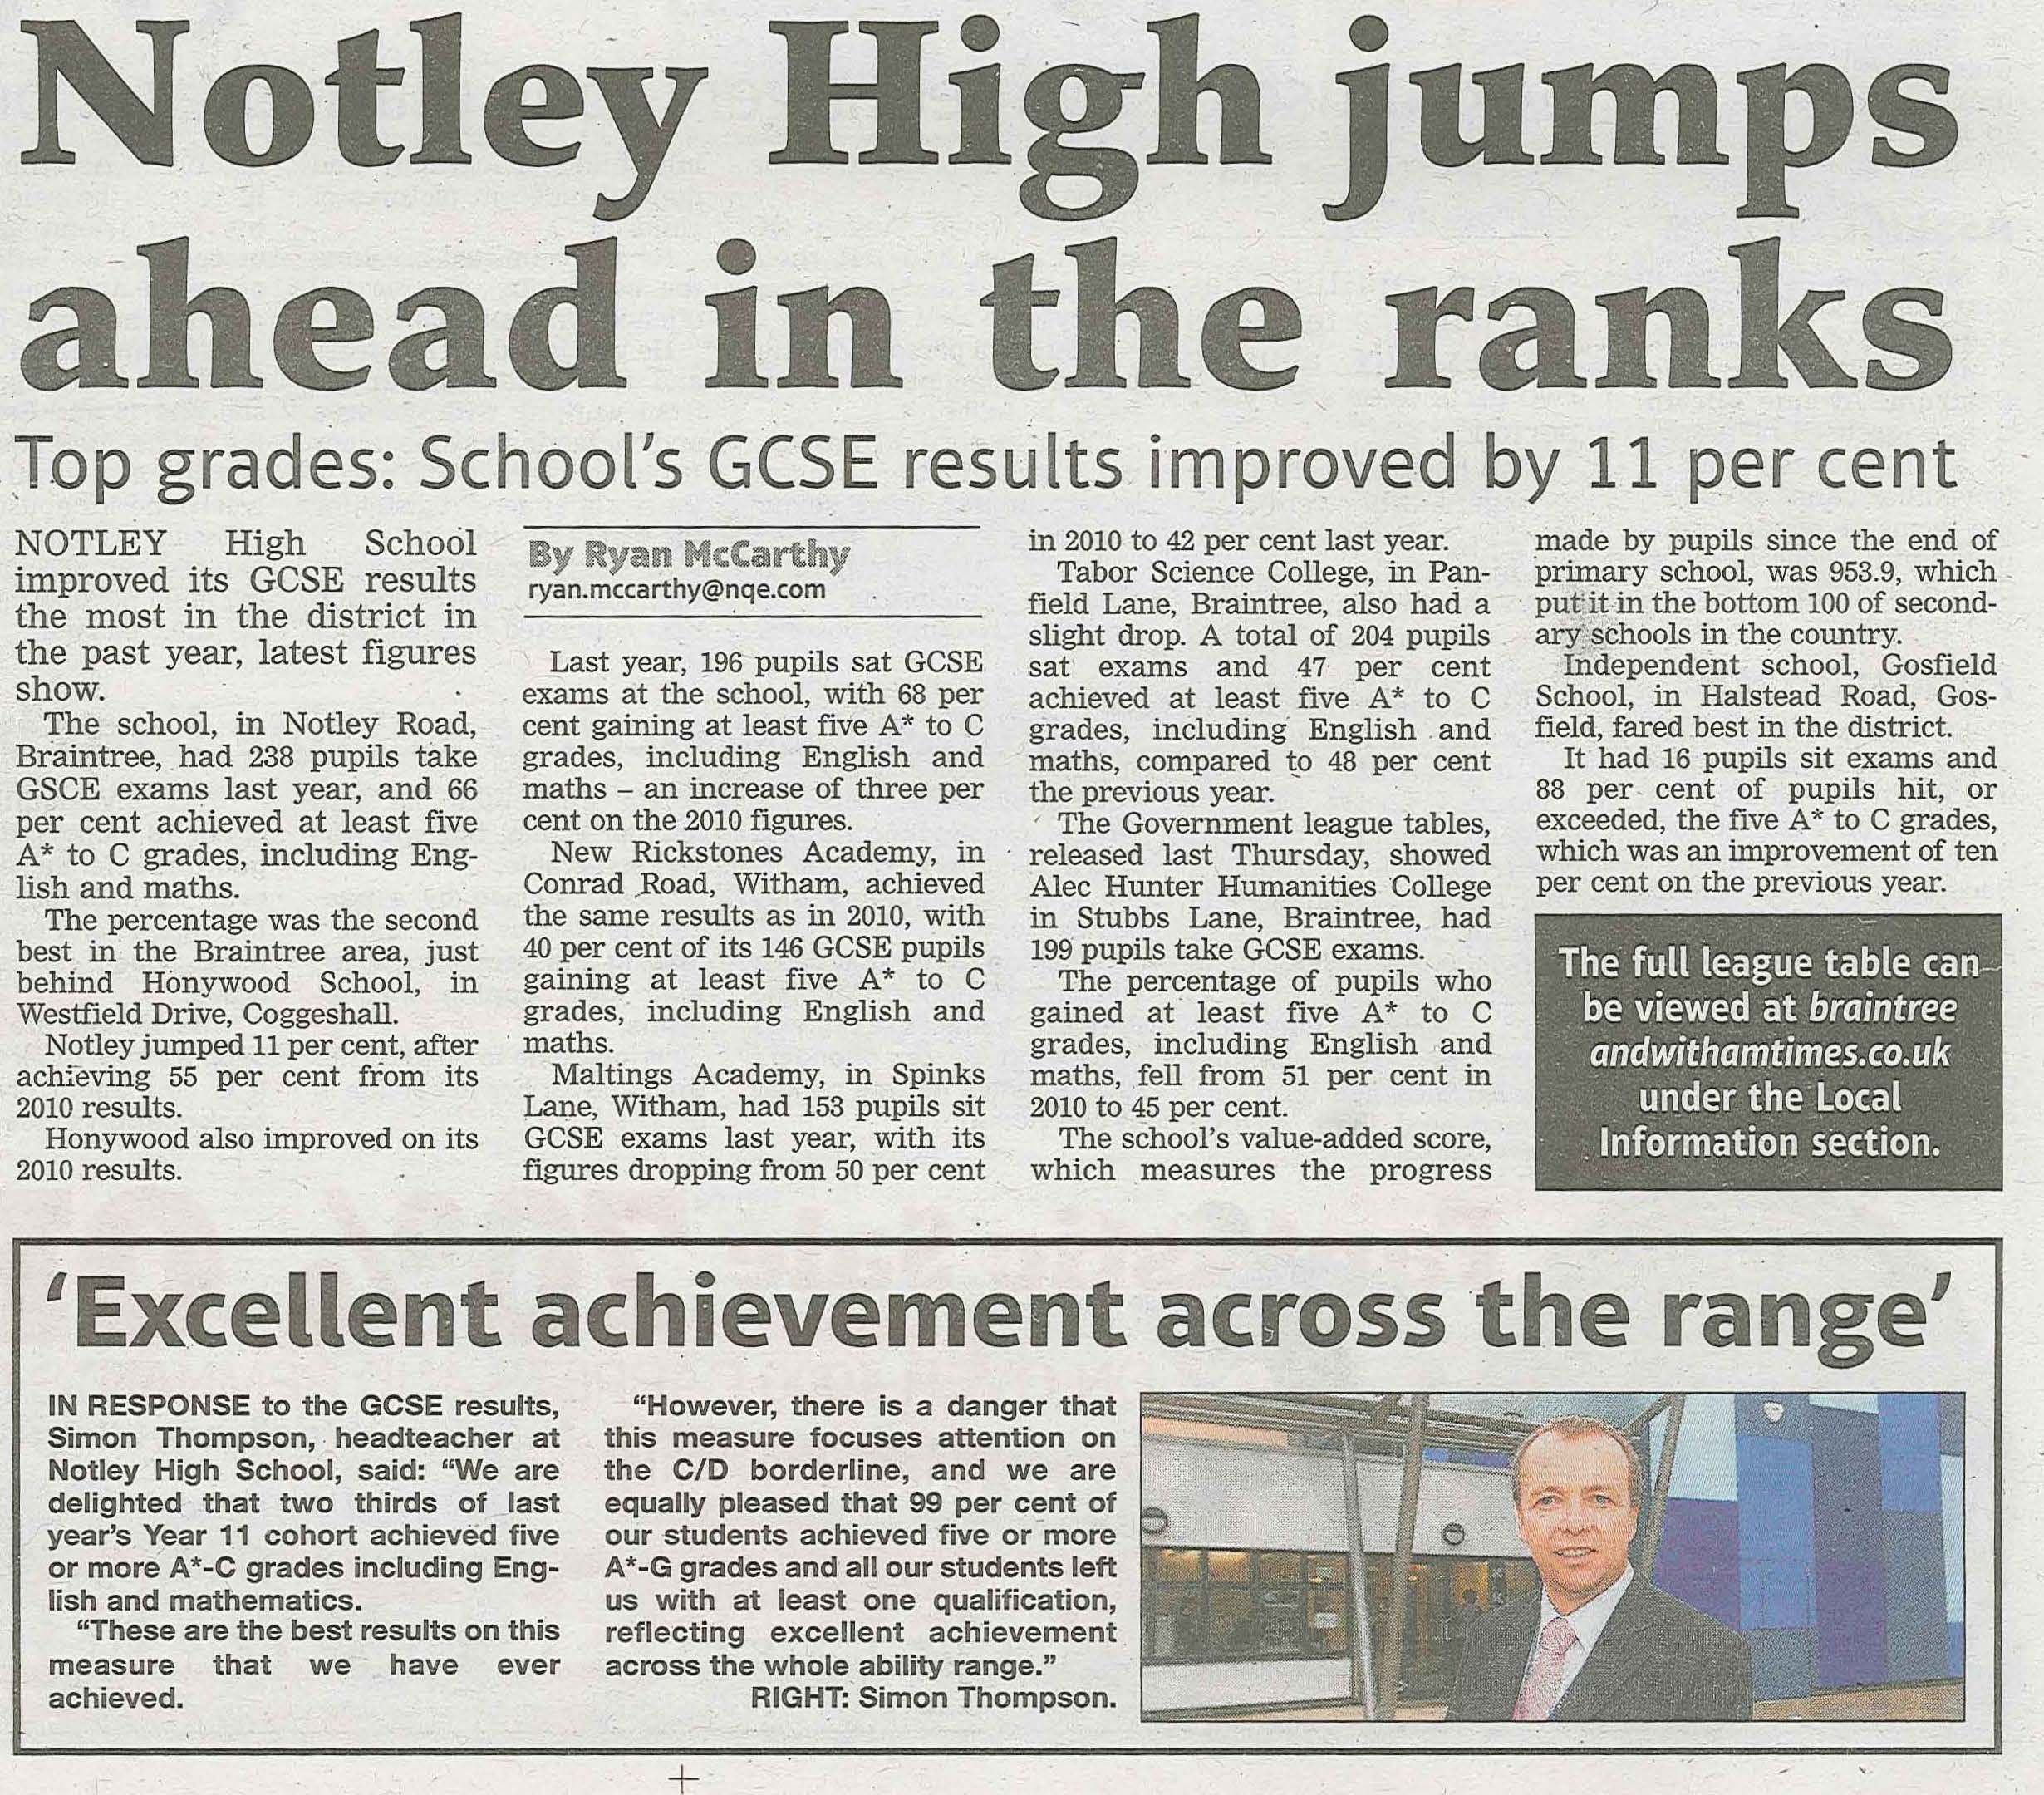 Notley High Jumps Ahead in the Ranks